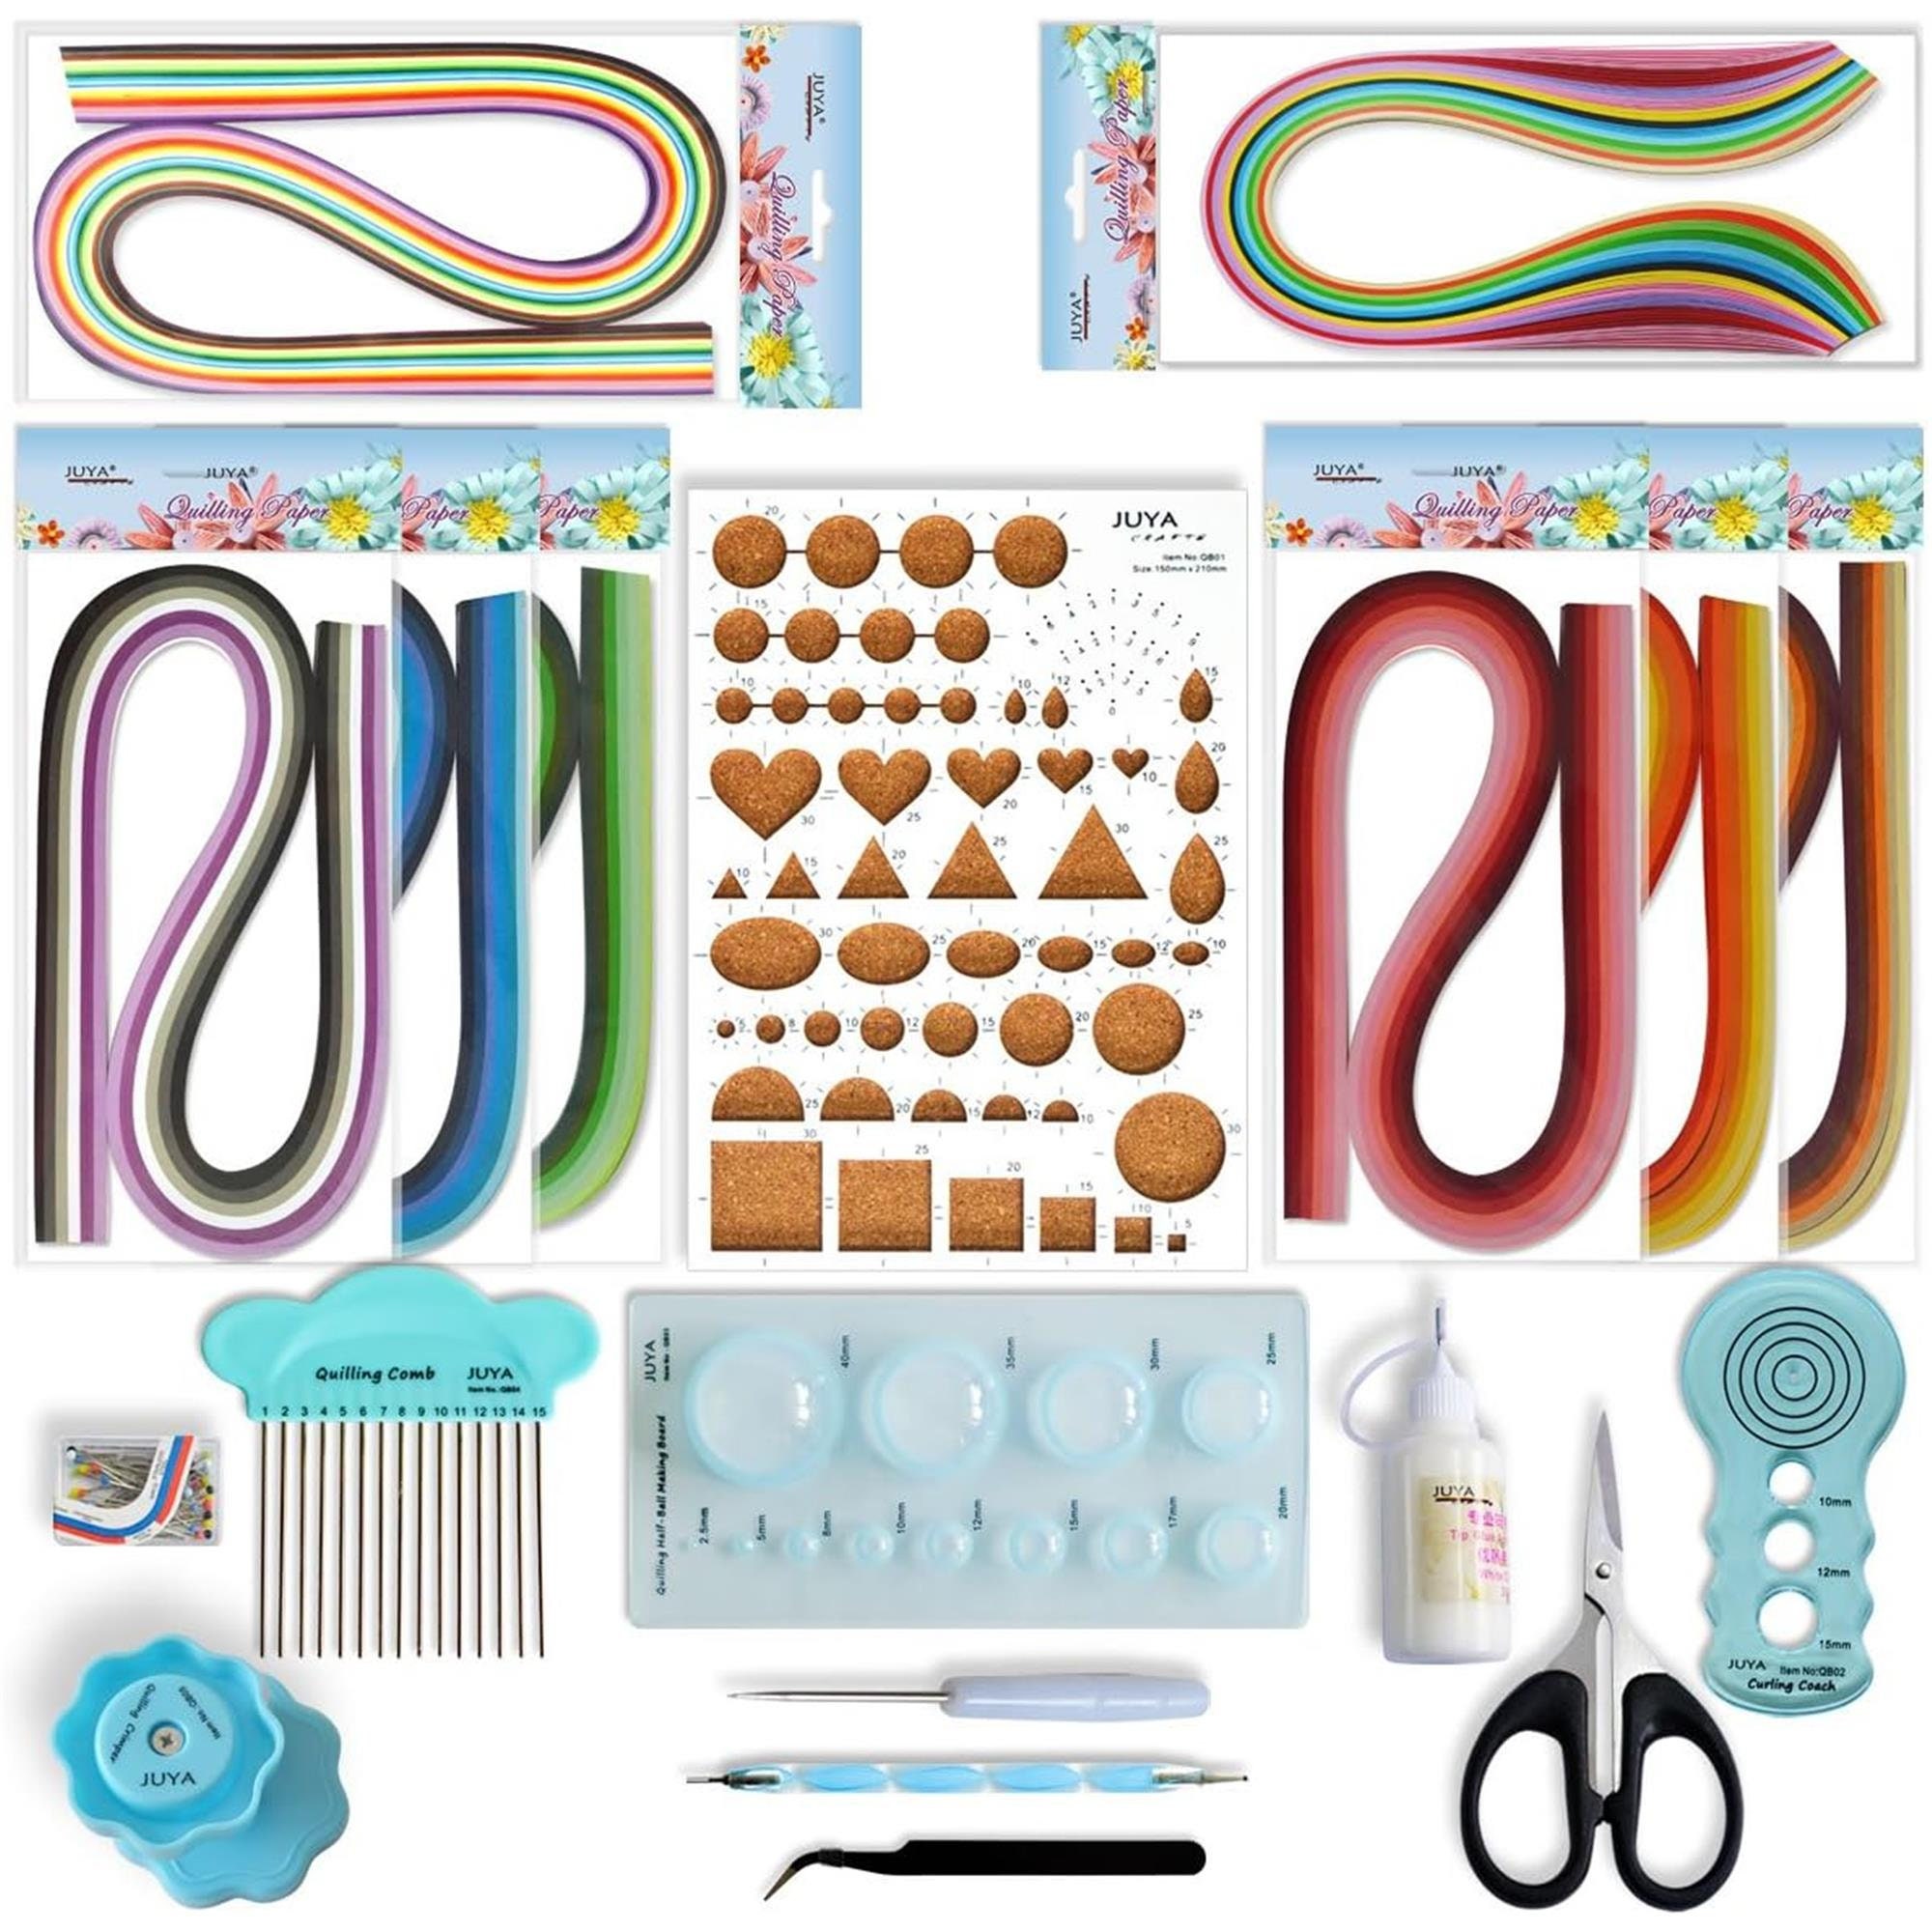 Colours Crafts Complete Quilling Kit - Quilling Materials with Wooden Frame, Template, Printed Background, Ruler, Quilling Tool, Paper Strips, Glue